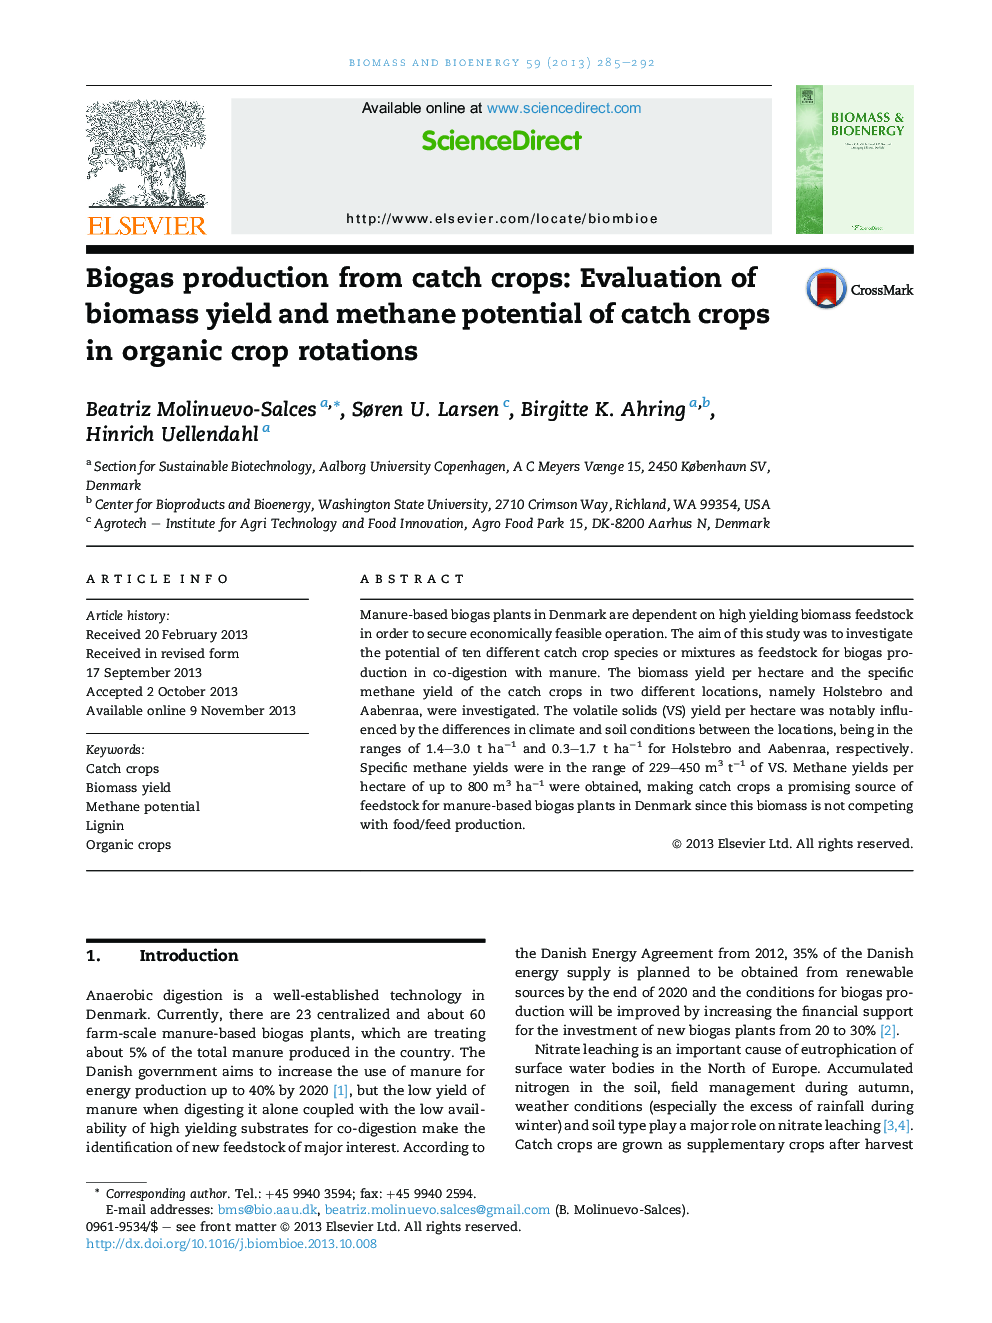 Biogas production from catch crops: Evaluation of biomass yield and methane potential of catch crops in organic crop rotations